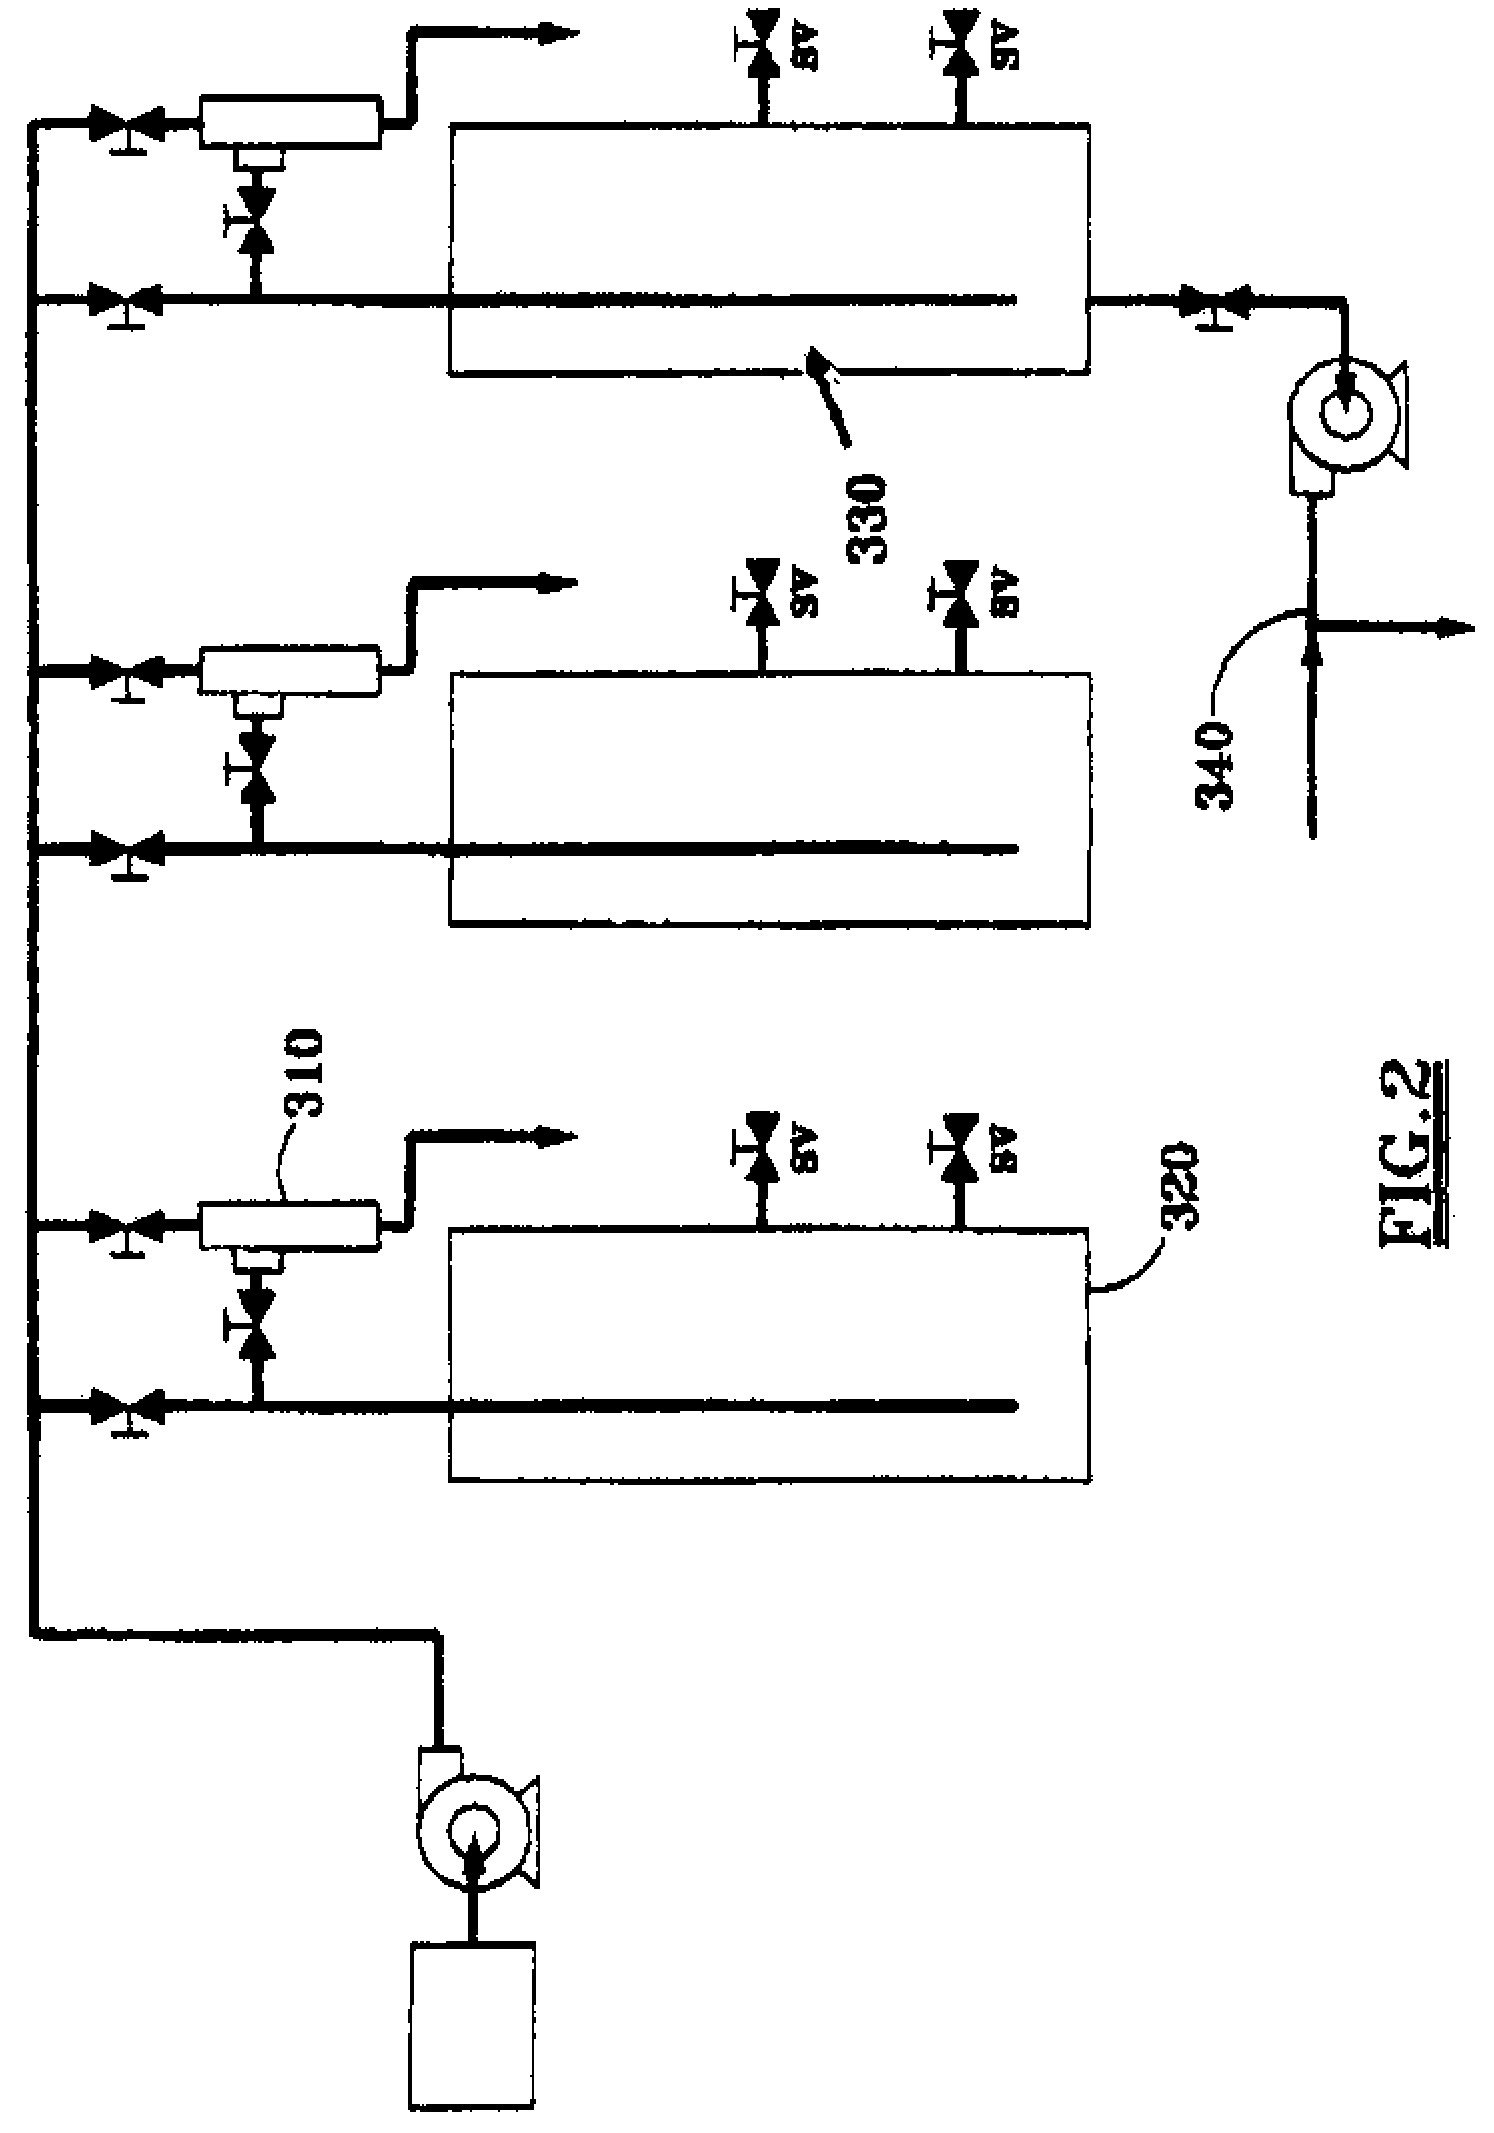 System and method for treatment of ballast water